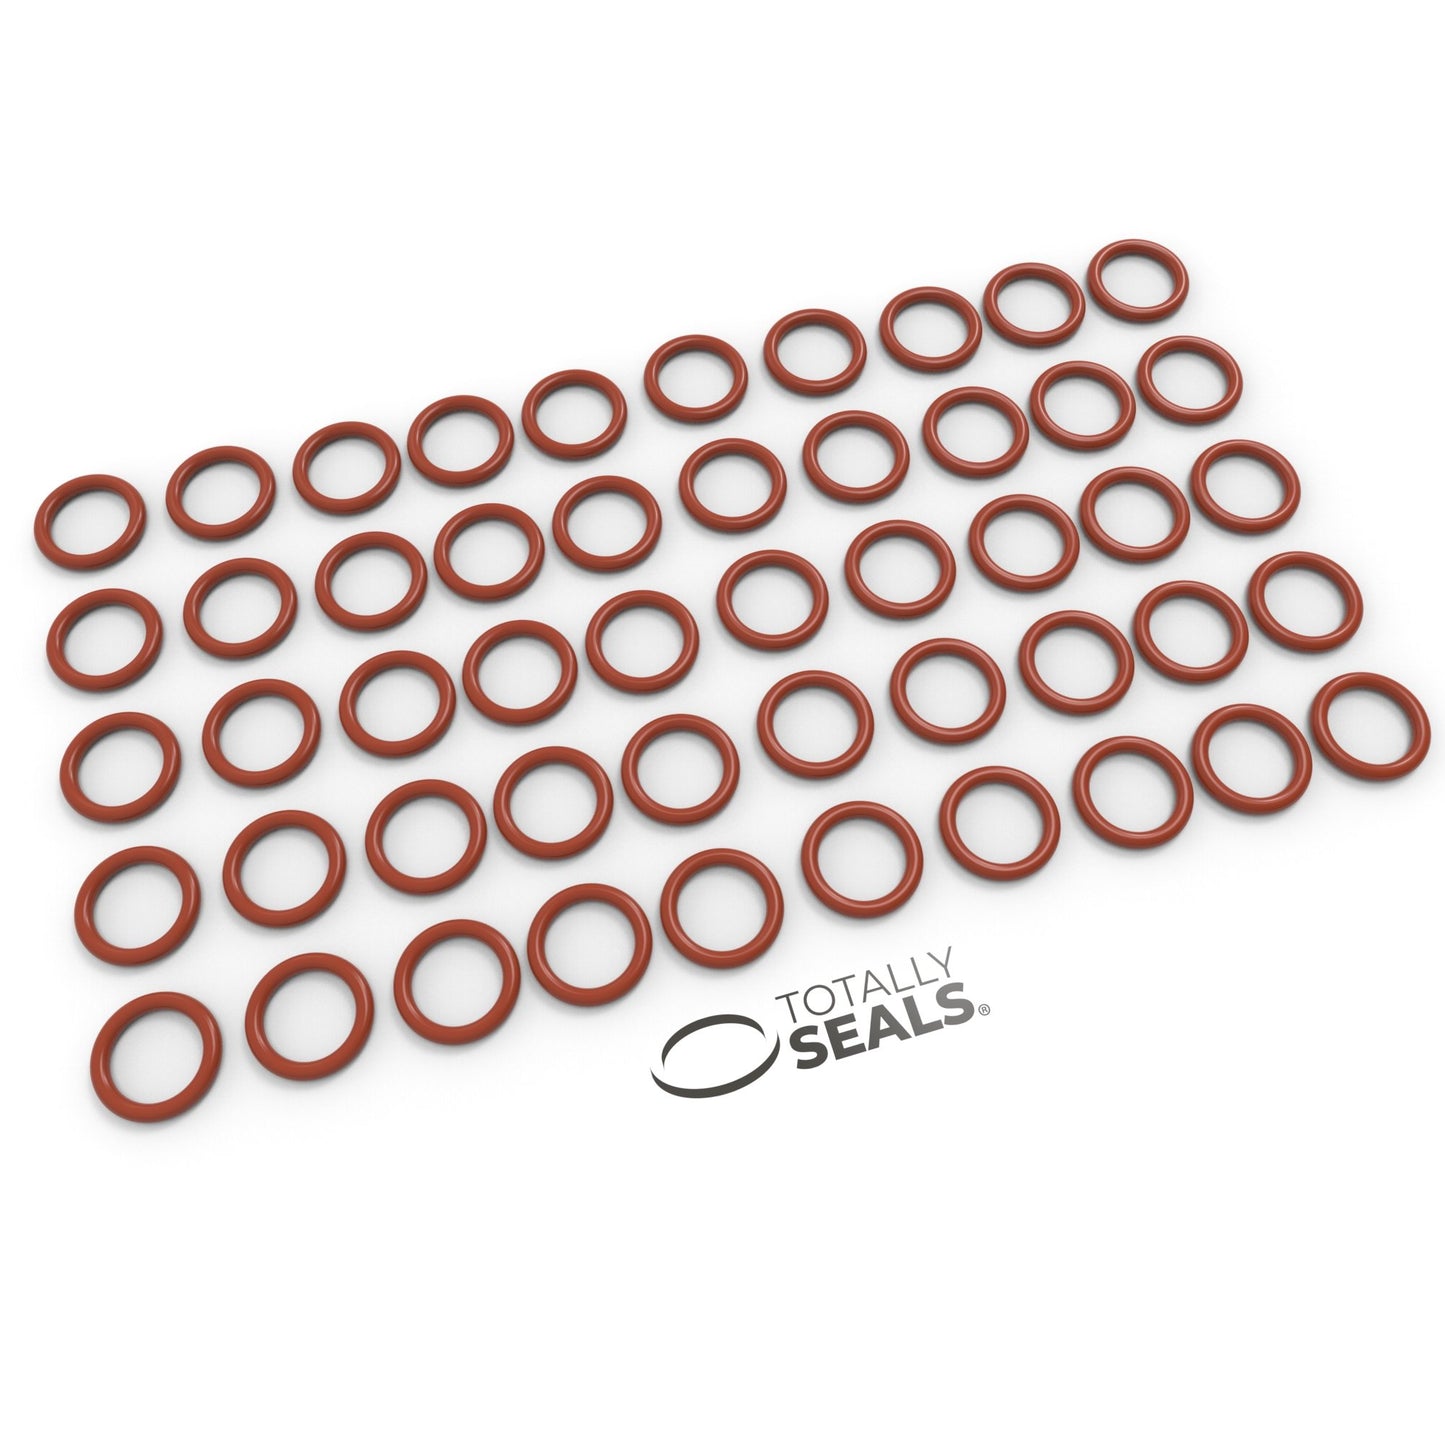 4mm x 2mm (8mm OD) Silicone O-Rings - Totally Seals®